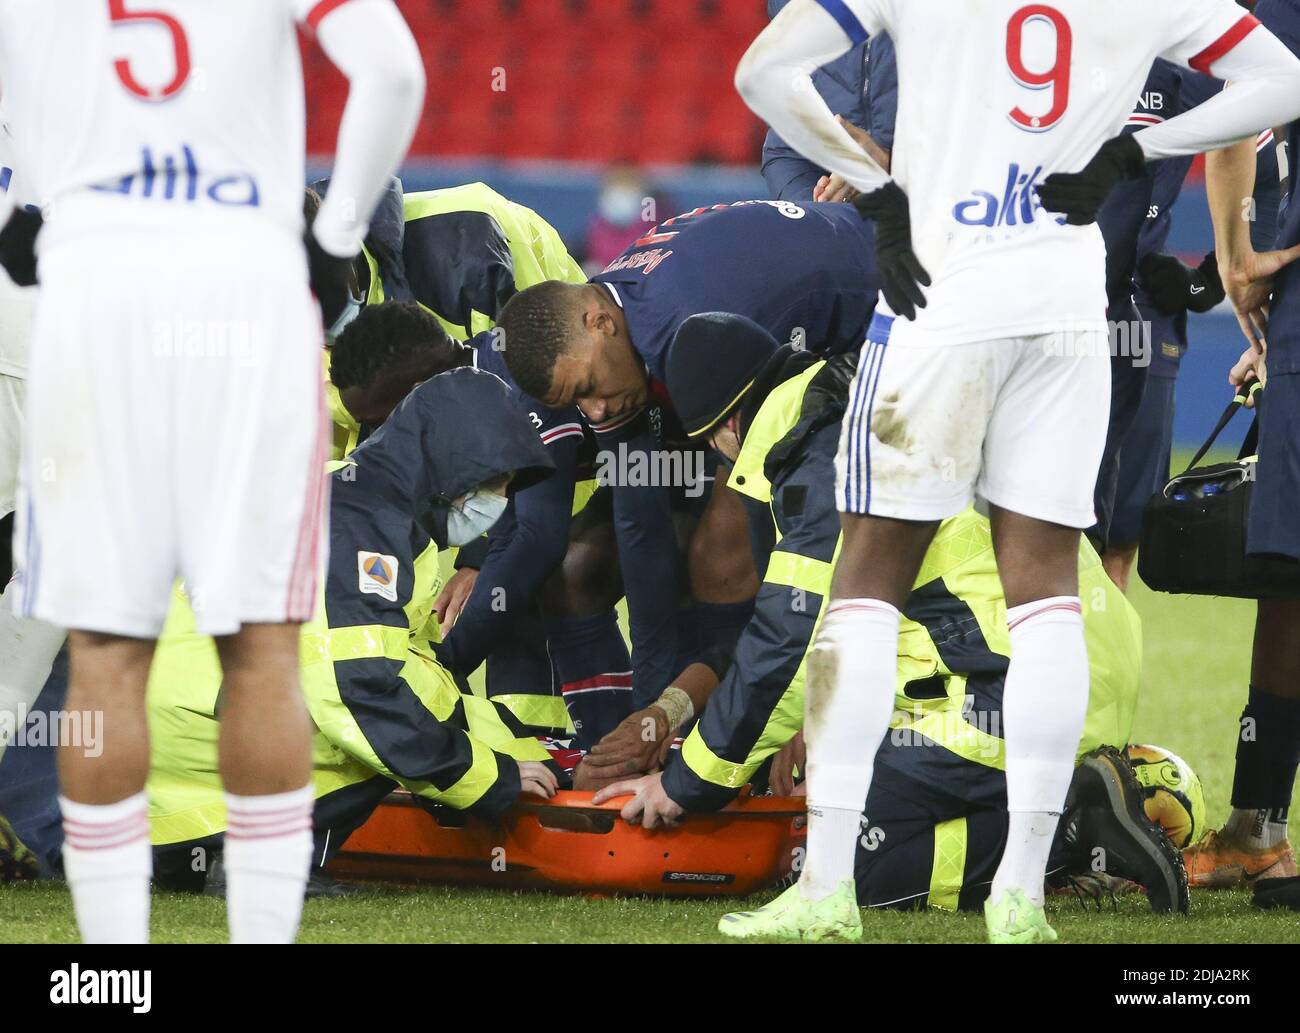 Neymar Jr of PSG, injured with a sprained ankle and consoled by Kylian Mbappe, leaves the pitch on a stretcher during the French / LM Stock Photo